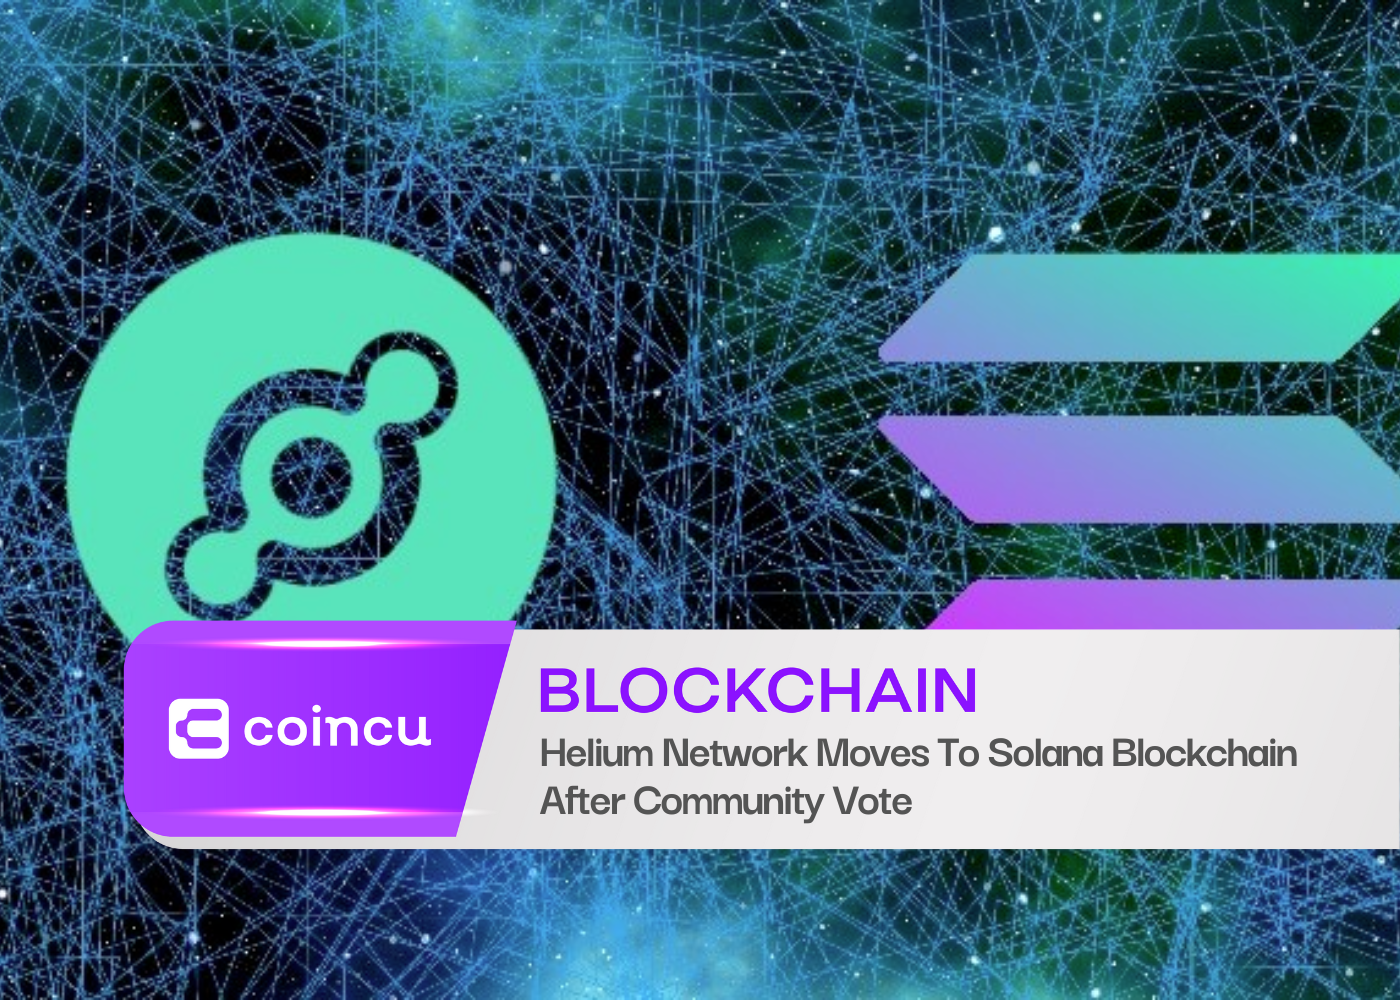 Helium Network Moves To Solana Blockchain After Community Vote